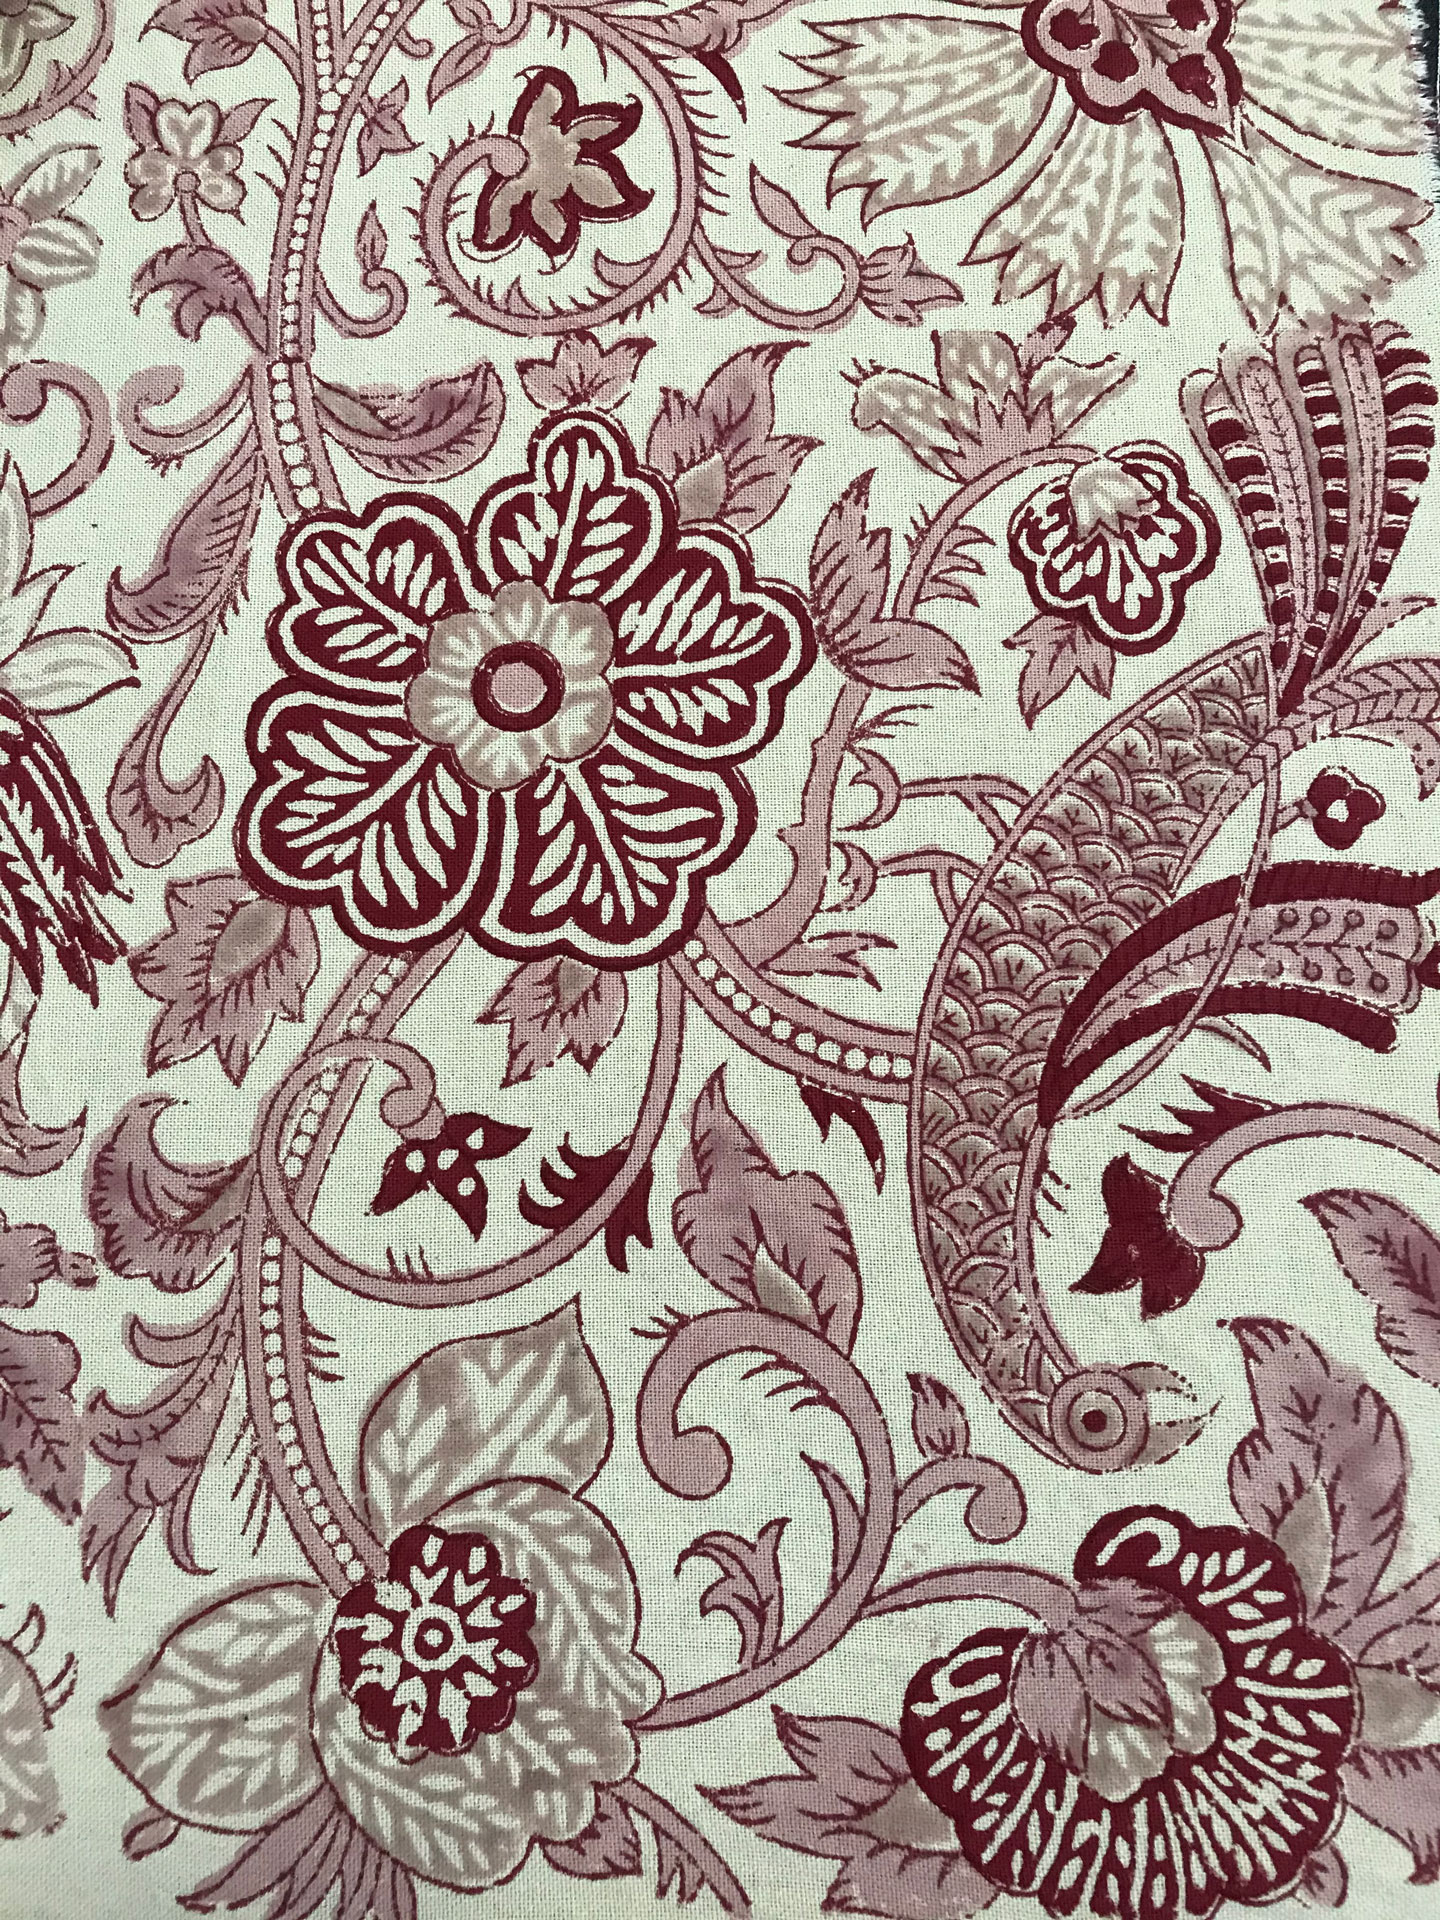 Printed fabric from Jaipur